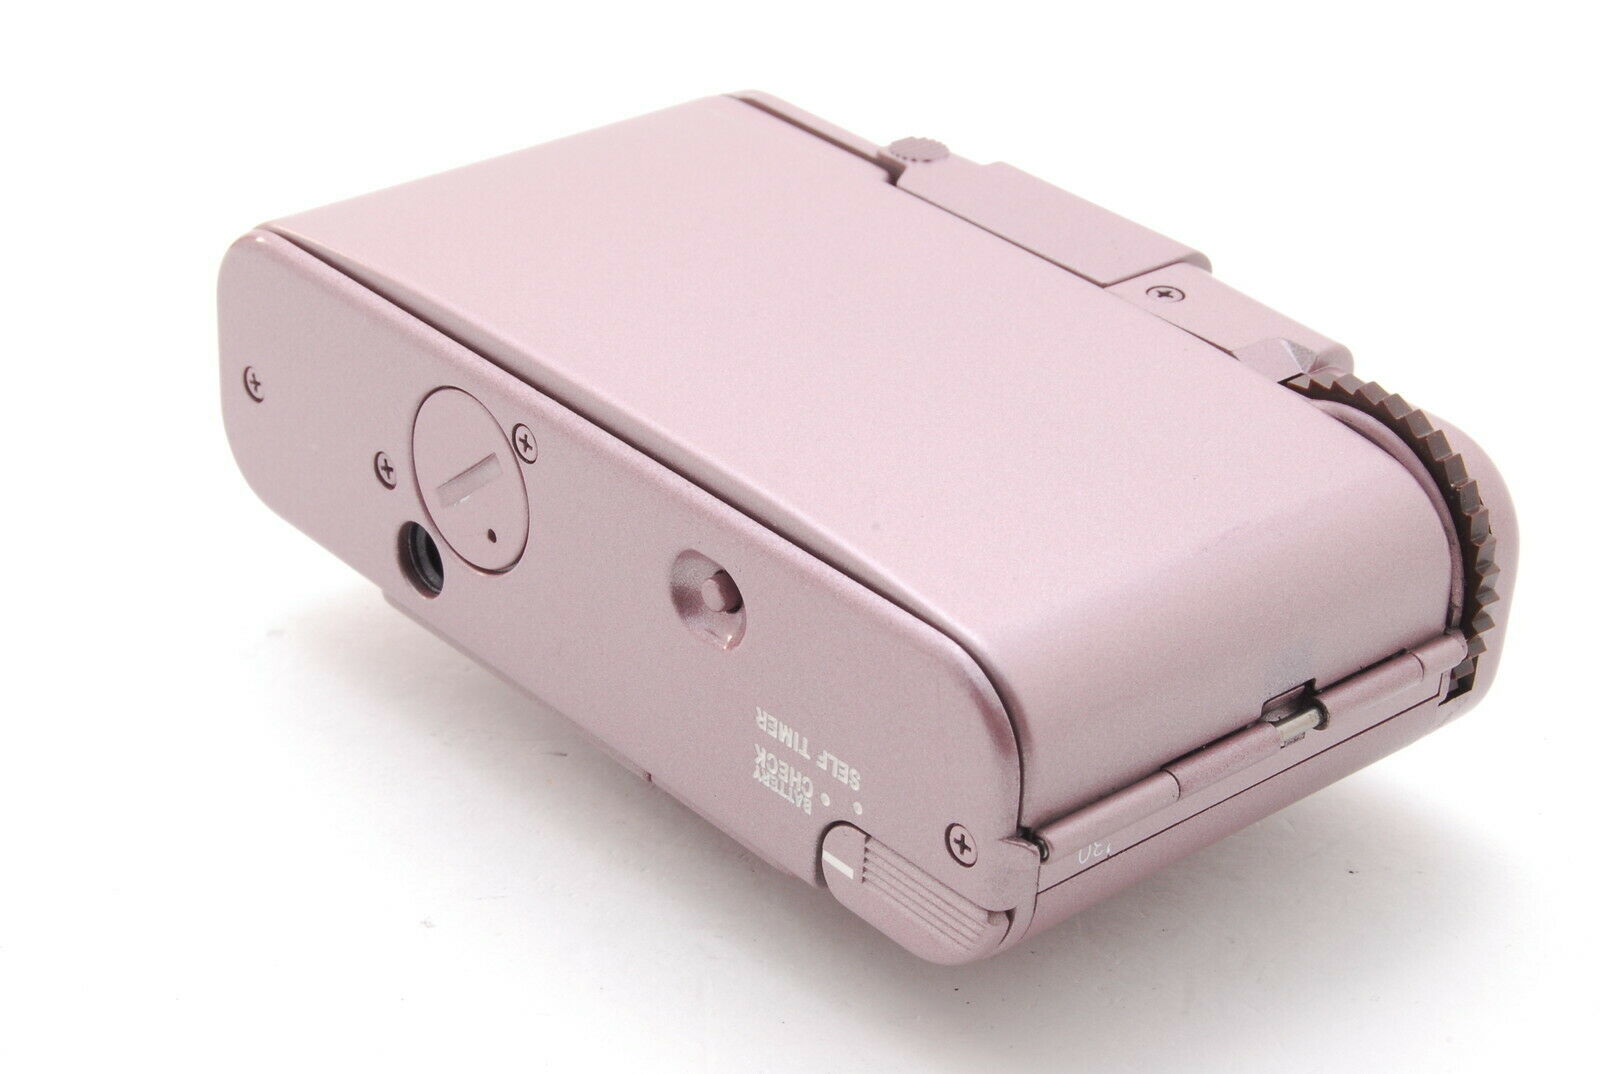 The Story of the Extremely Rare Pink Olympus XA-2